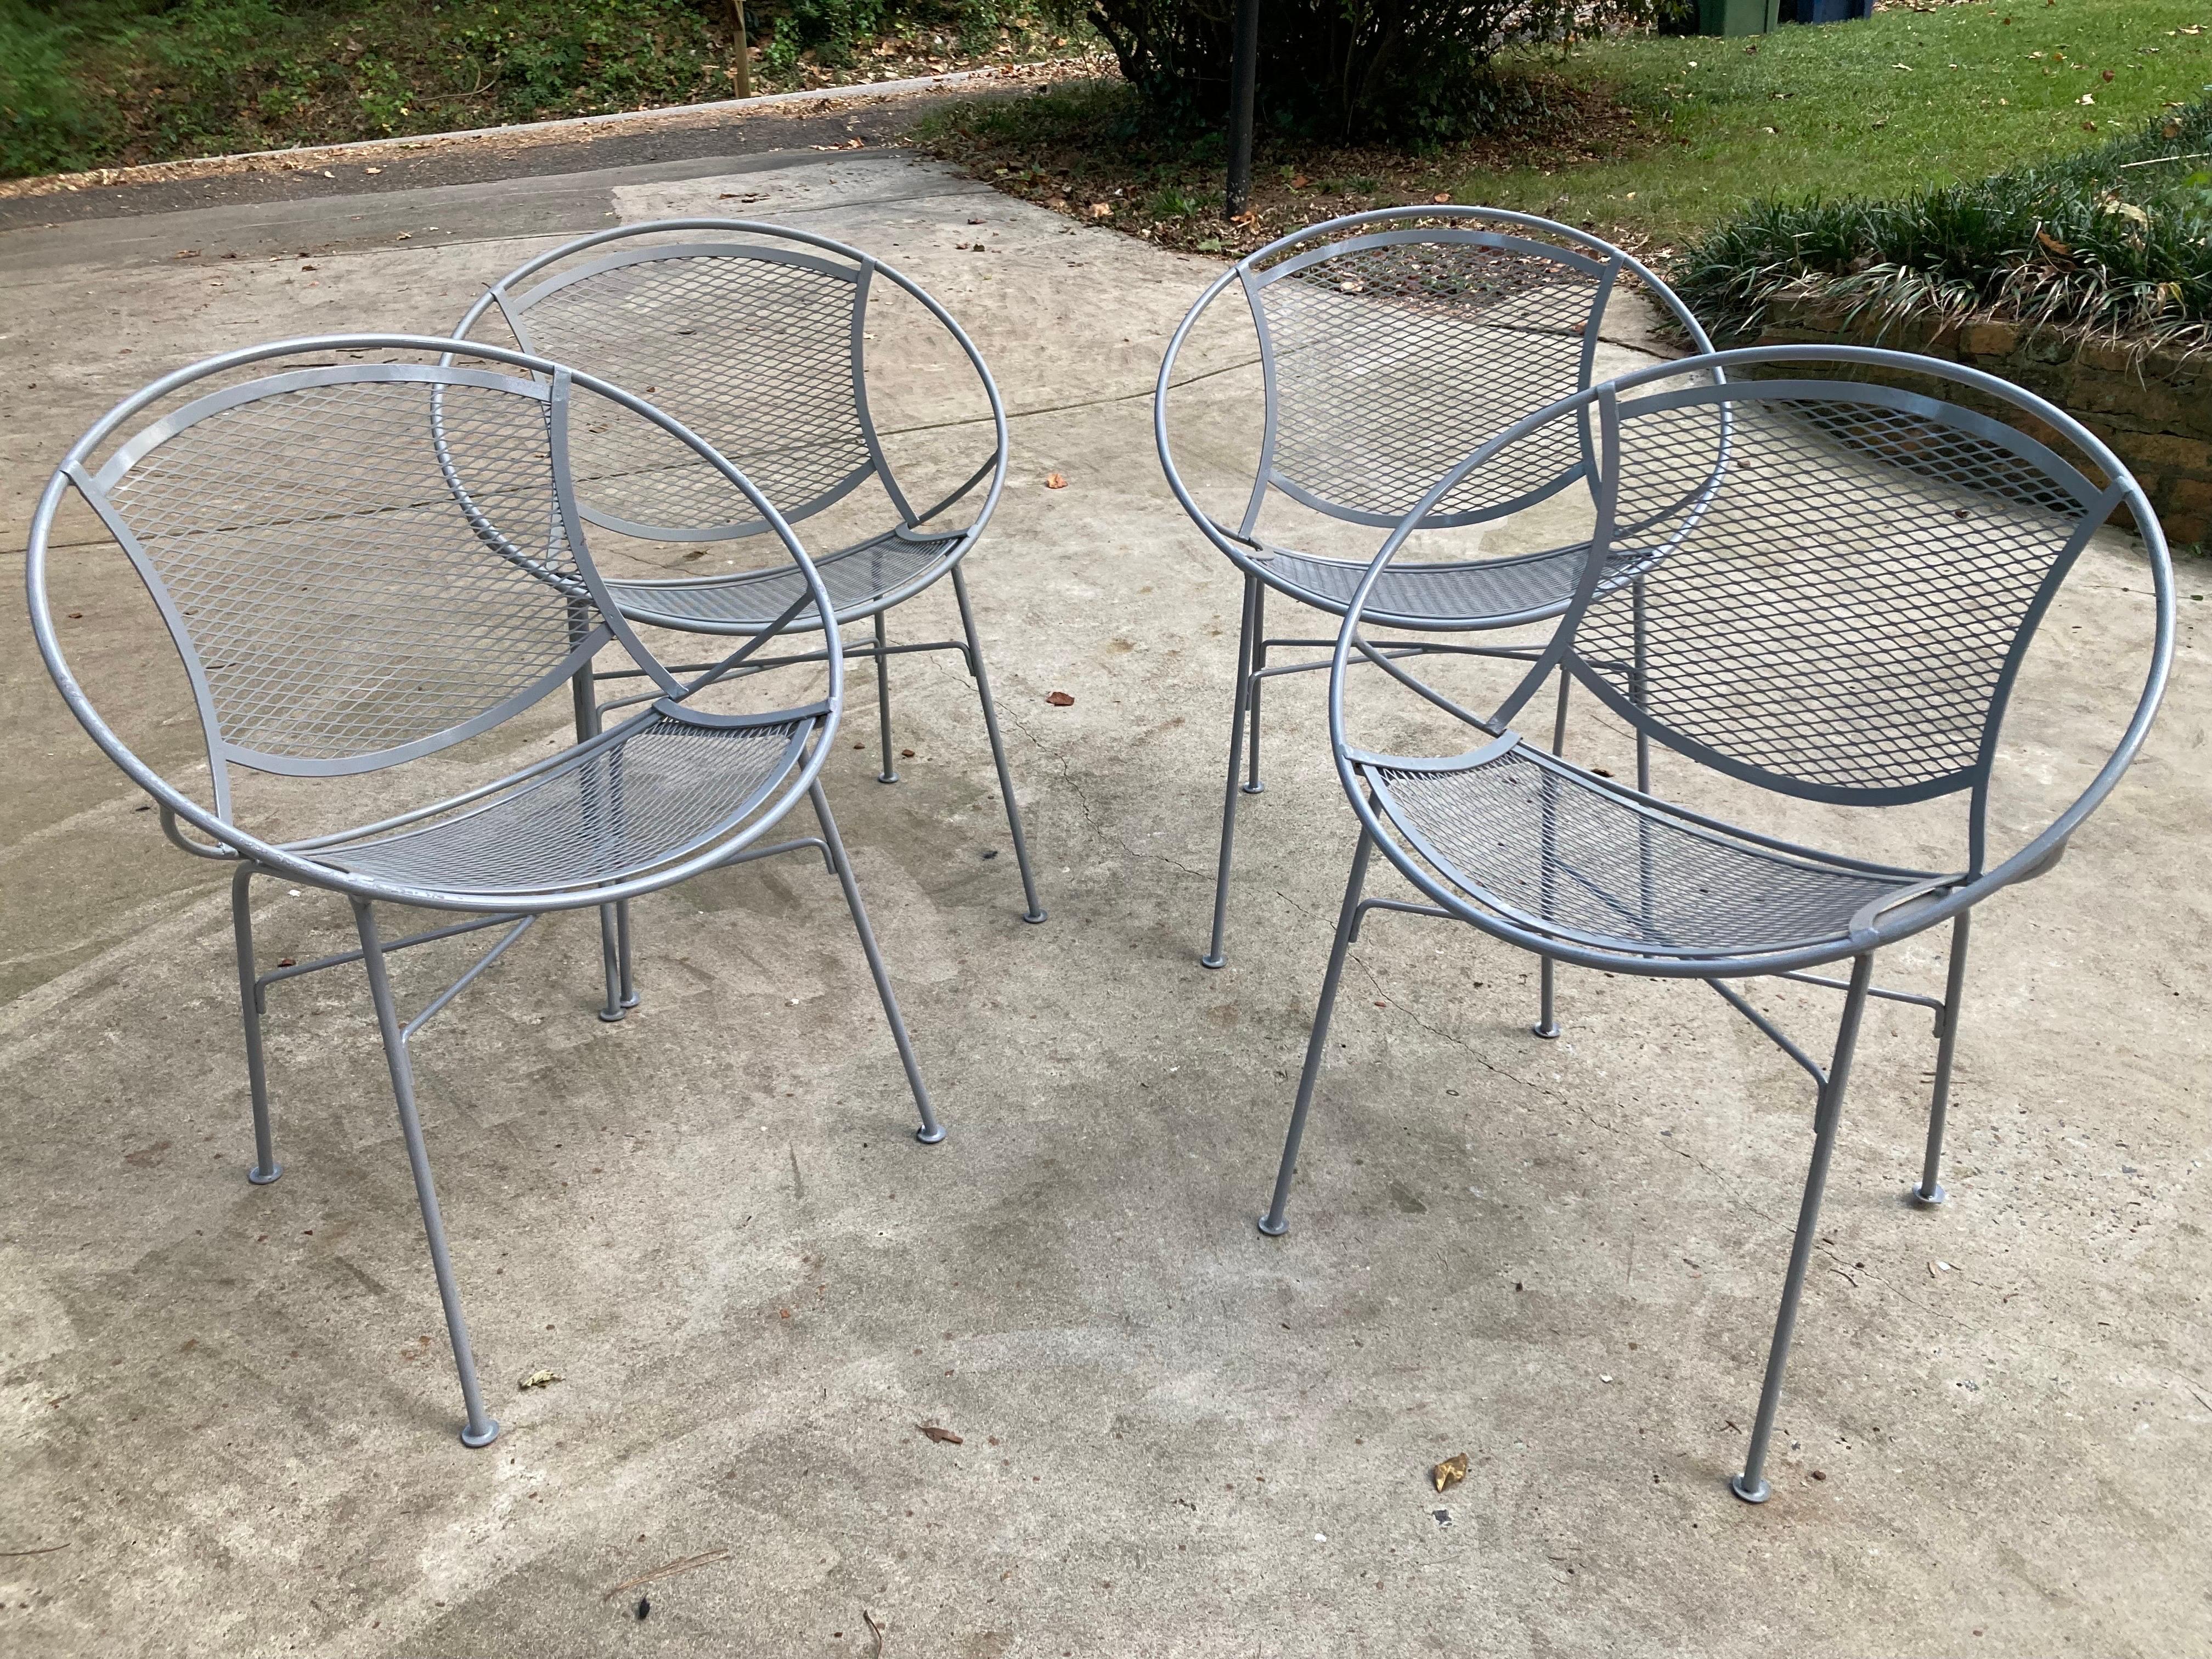 offering a set of 4 radar chairs, professionally sandblasted, primed in grey. these can be painted to specification or sold as is… iconic mid century patio chairs no makers mark
circa 1950 shipping from athens ga